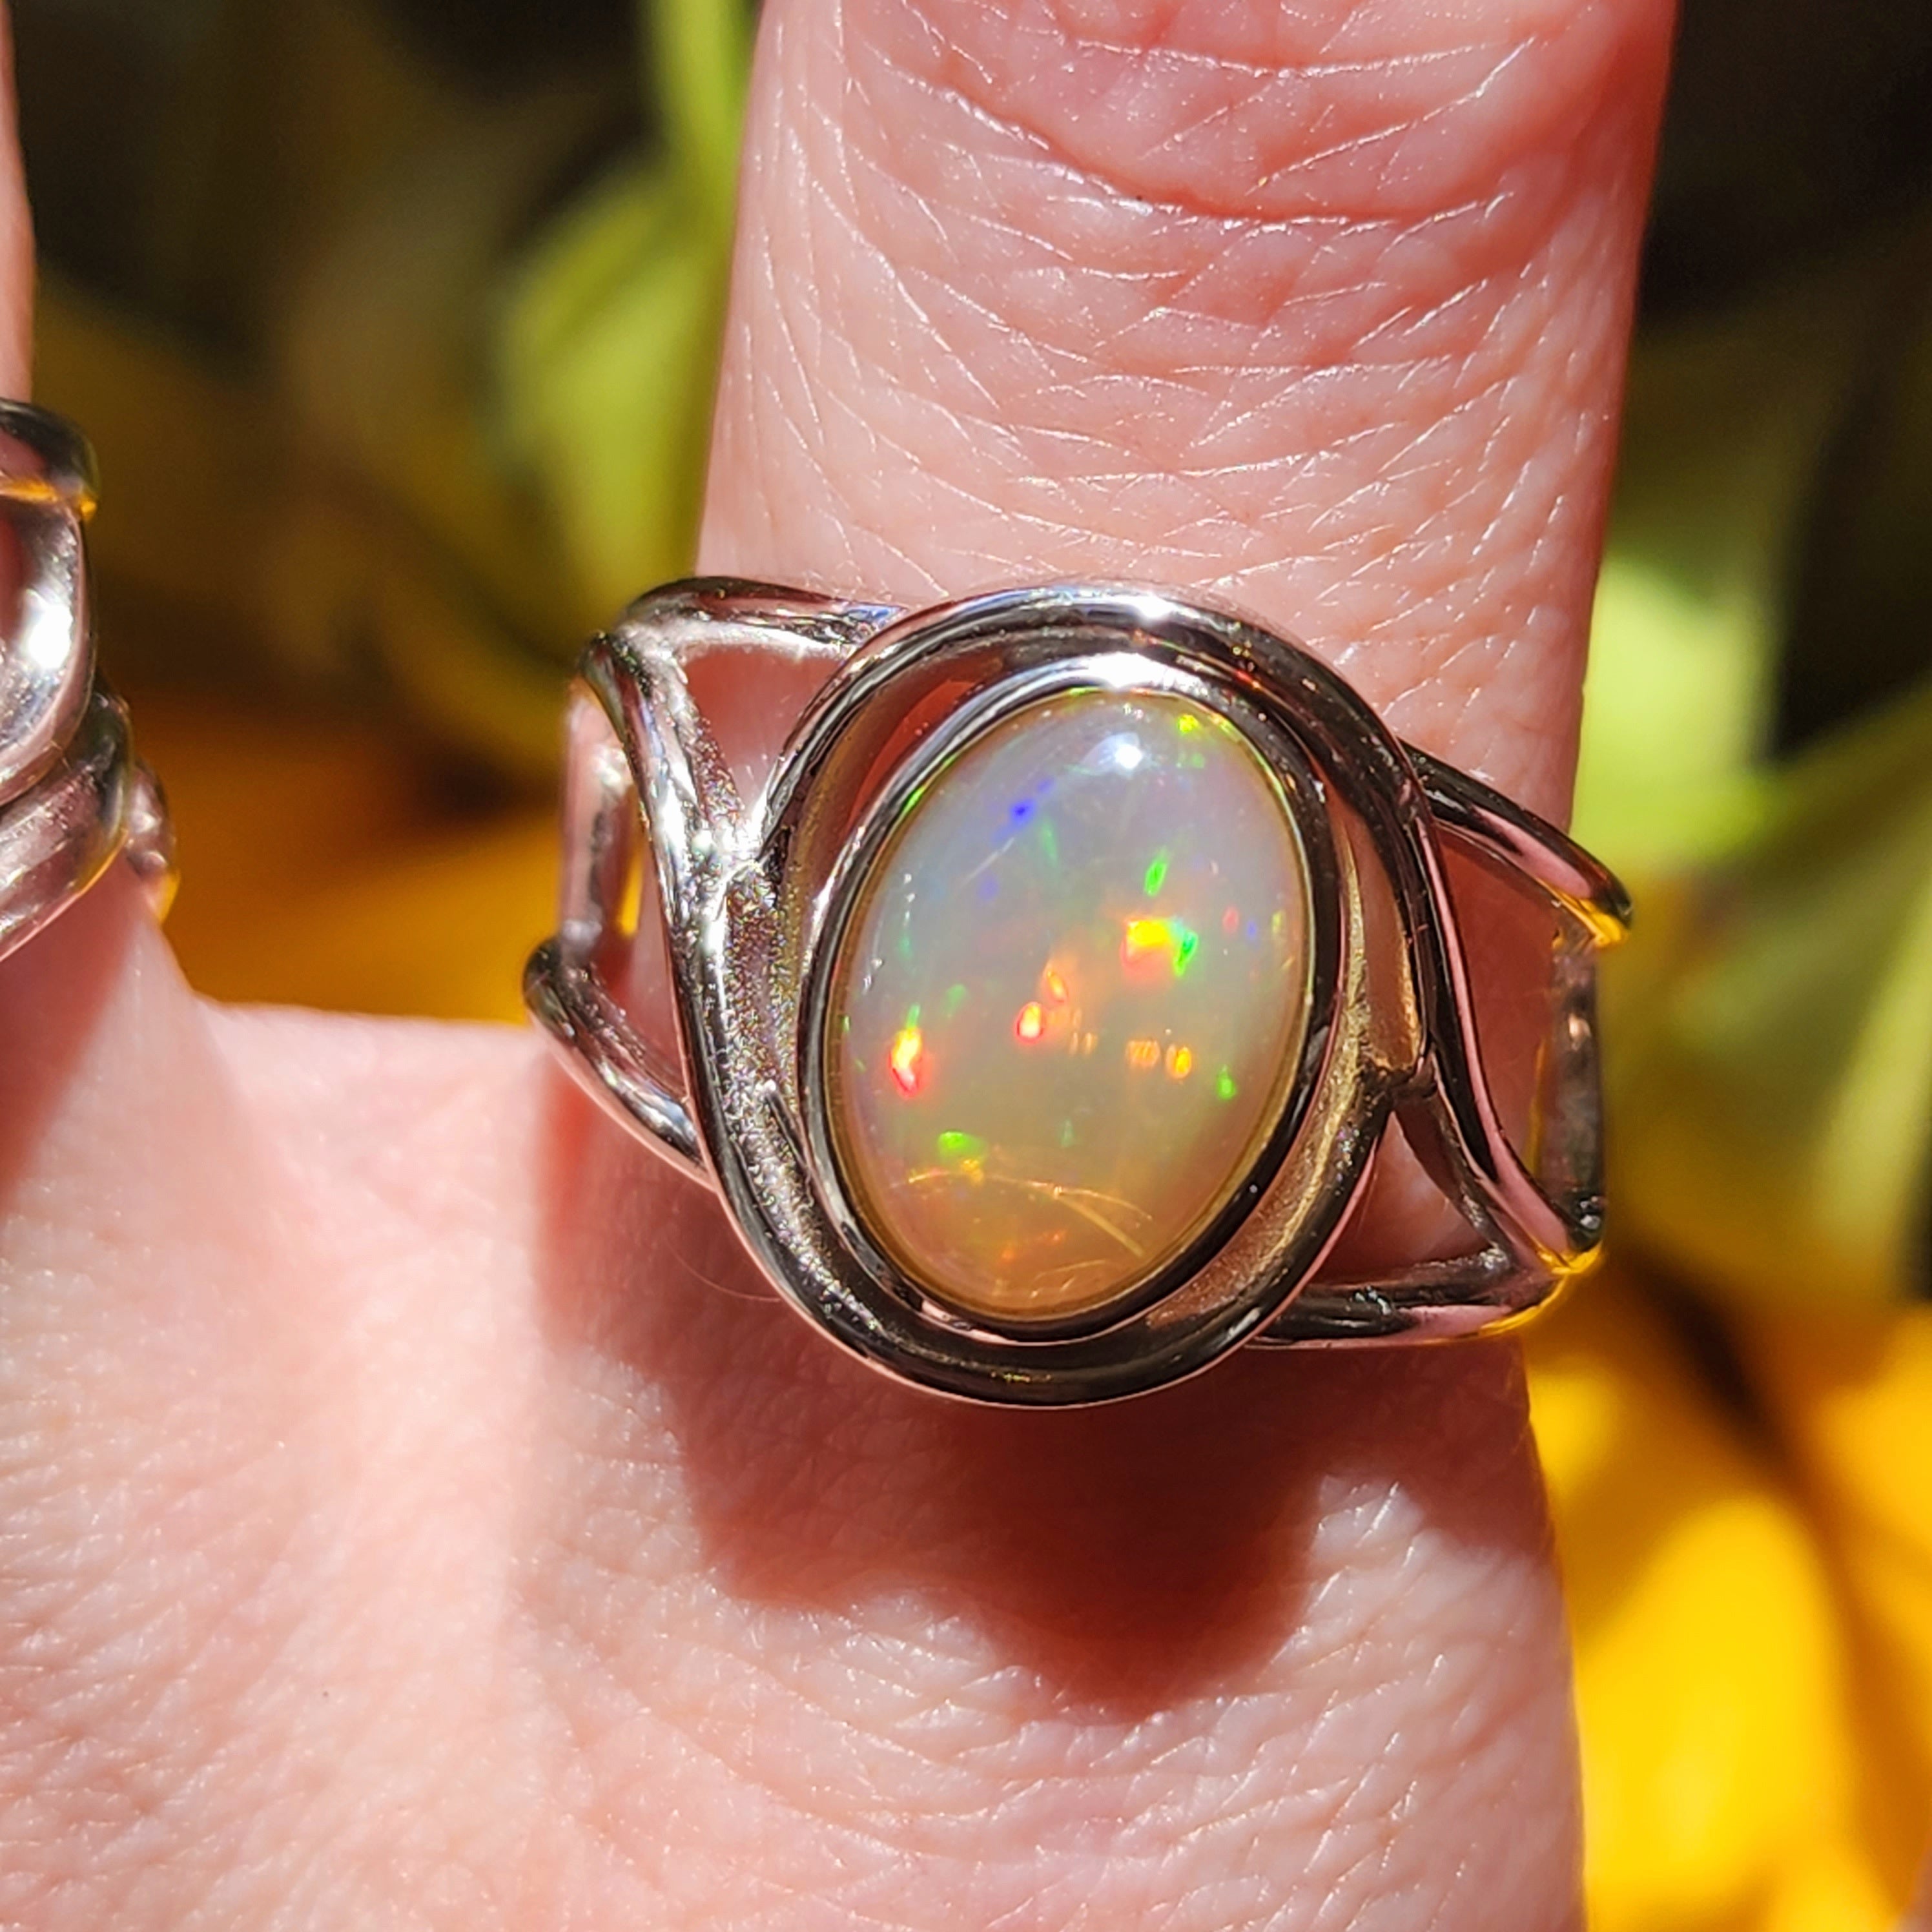 Welo Opal Finger Cuff Adjustable Ring .925 Silver for Good Luck, Transformation and Joy